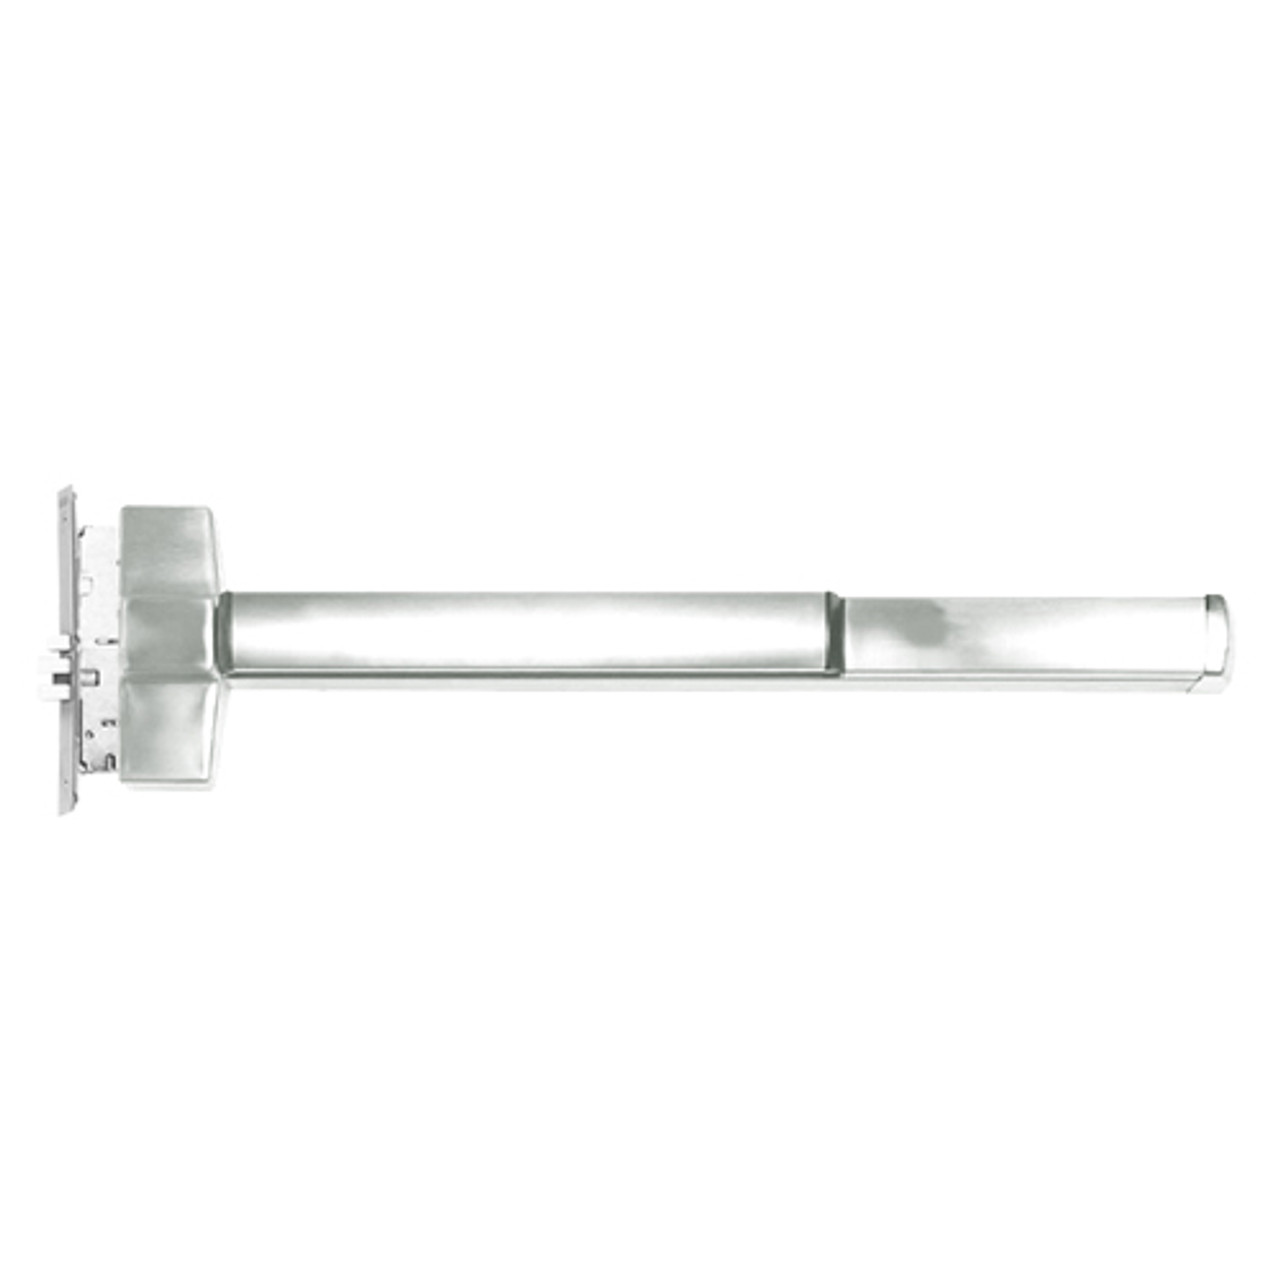 ED5600AT-618-RHR Corbin ED5600 Series Fire Rated Mortise Exit Device in Bright Nickel Finish